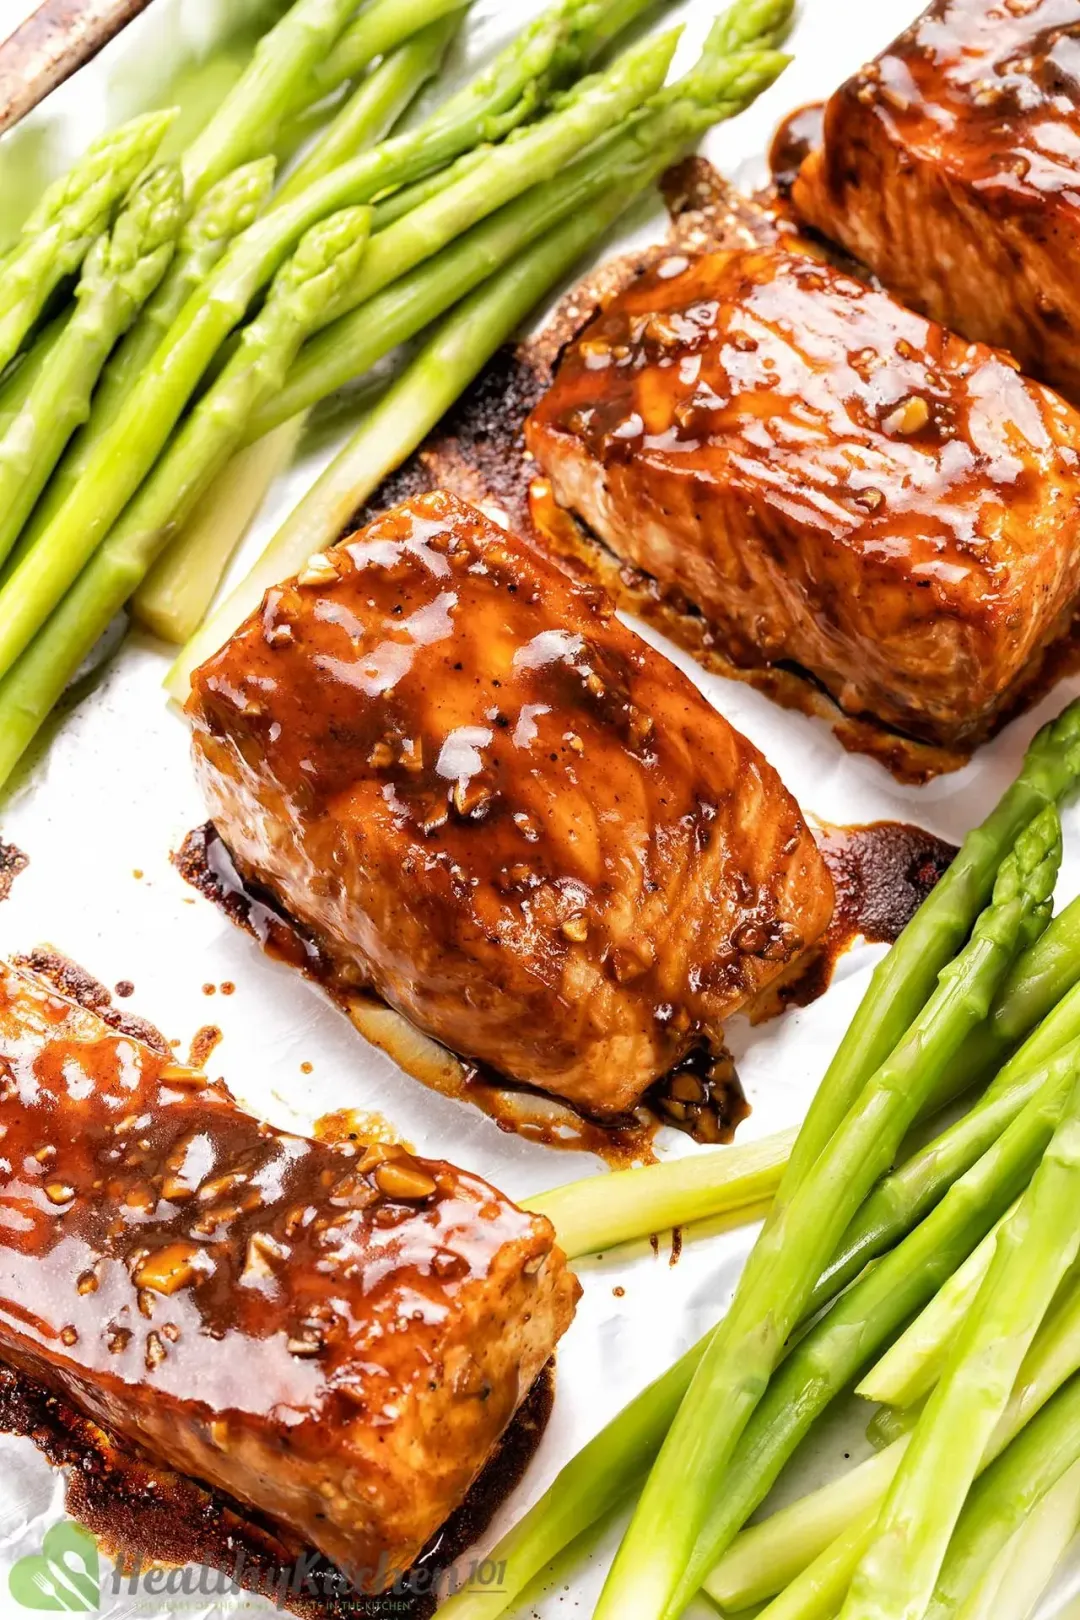 Four filets of salmon are fully coated in teriyaki sauce and placed on a baking sheet together with asparagus.